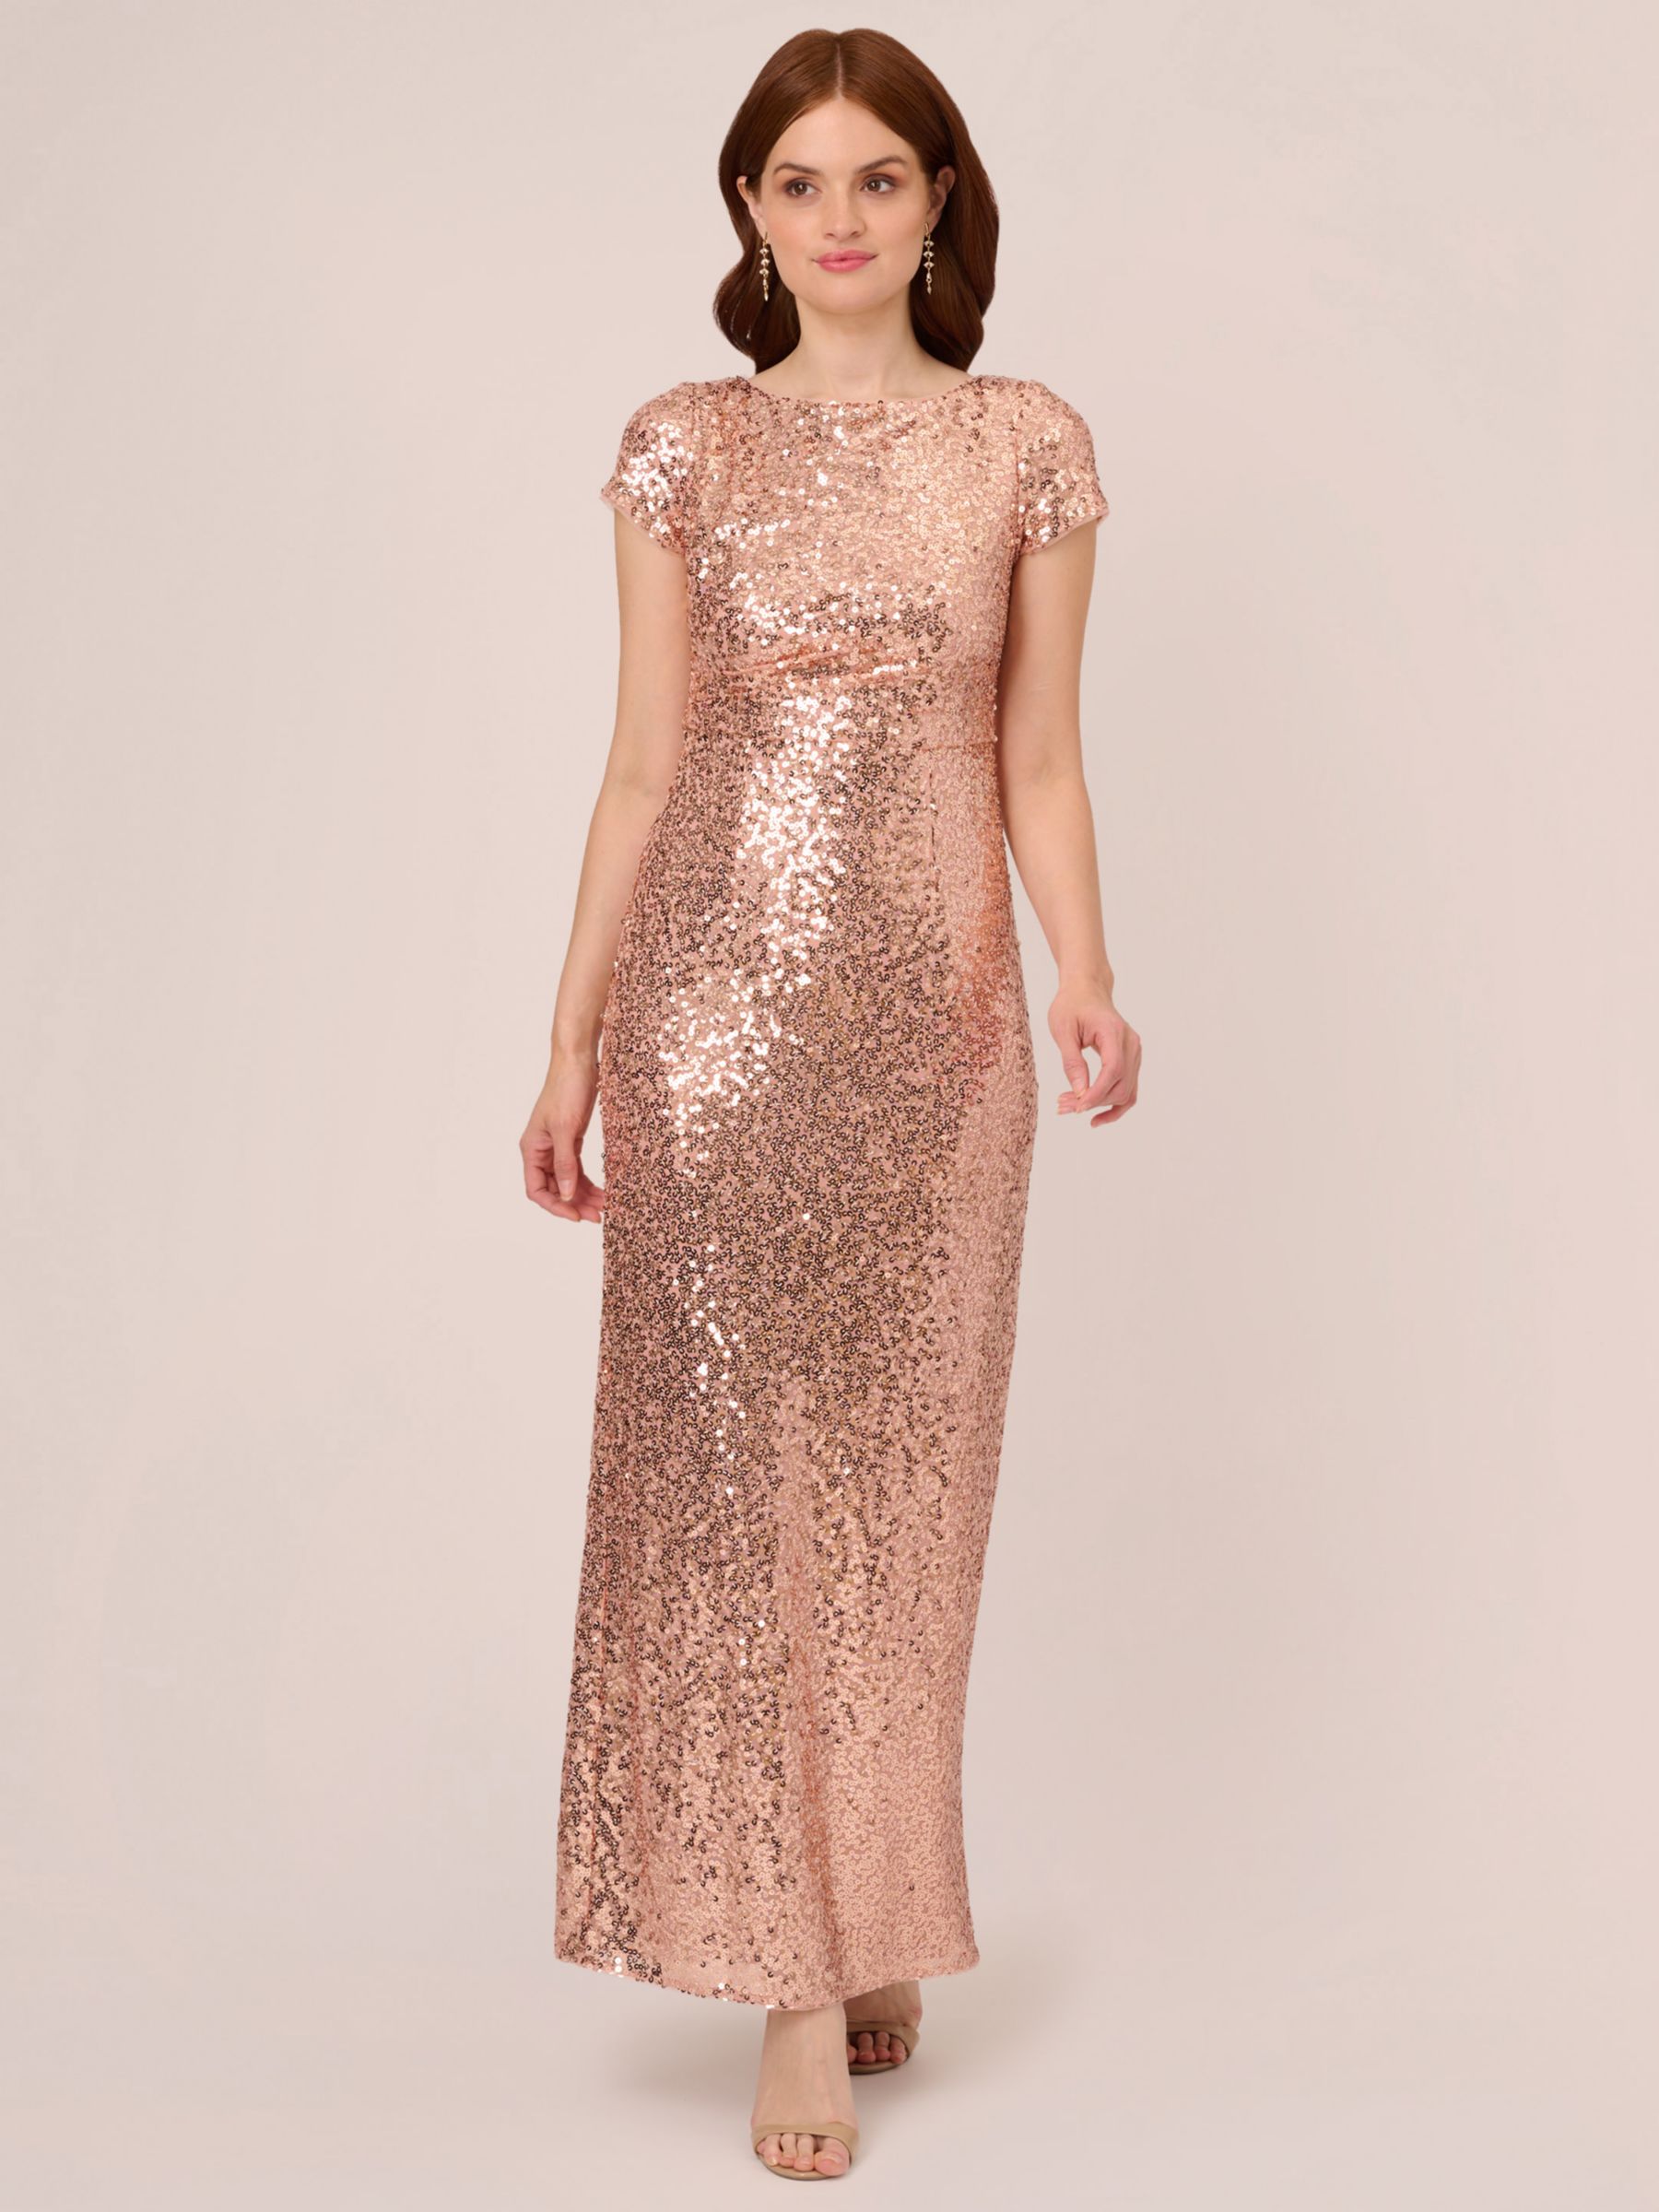  Adrianna Papell Women's Beaded Illusion Column Gown, Rose Gold,  0 : Clothing, Shoes & Jewelry